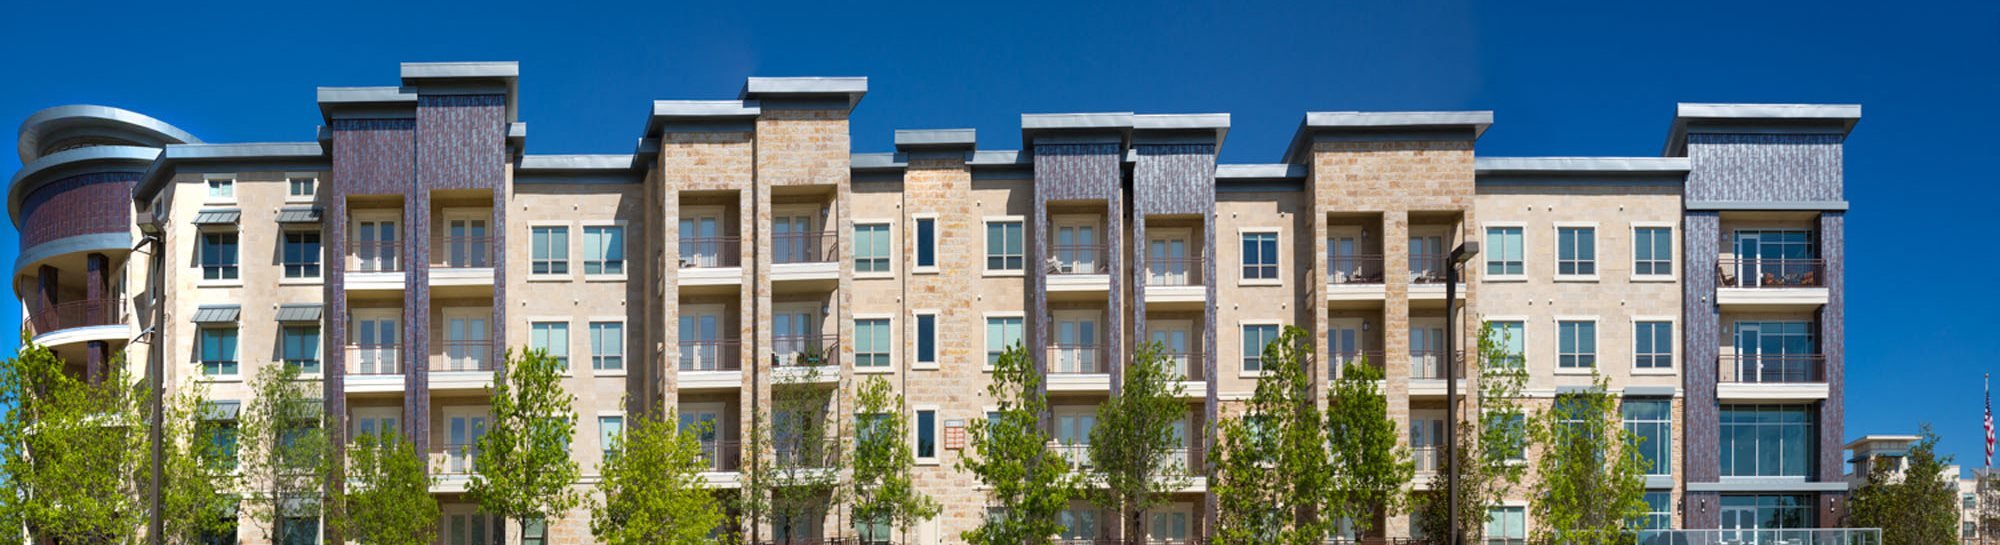 Fountain Pointe Las Colinas offers beautiful one, two or three bedroom apartments